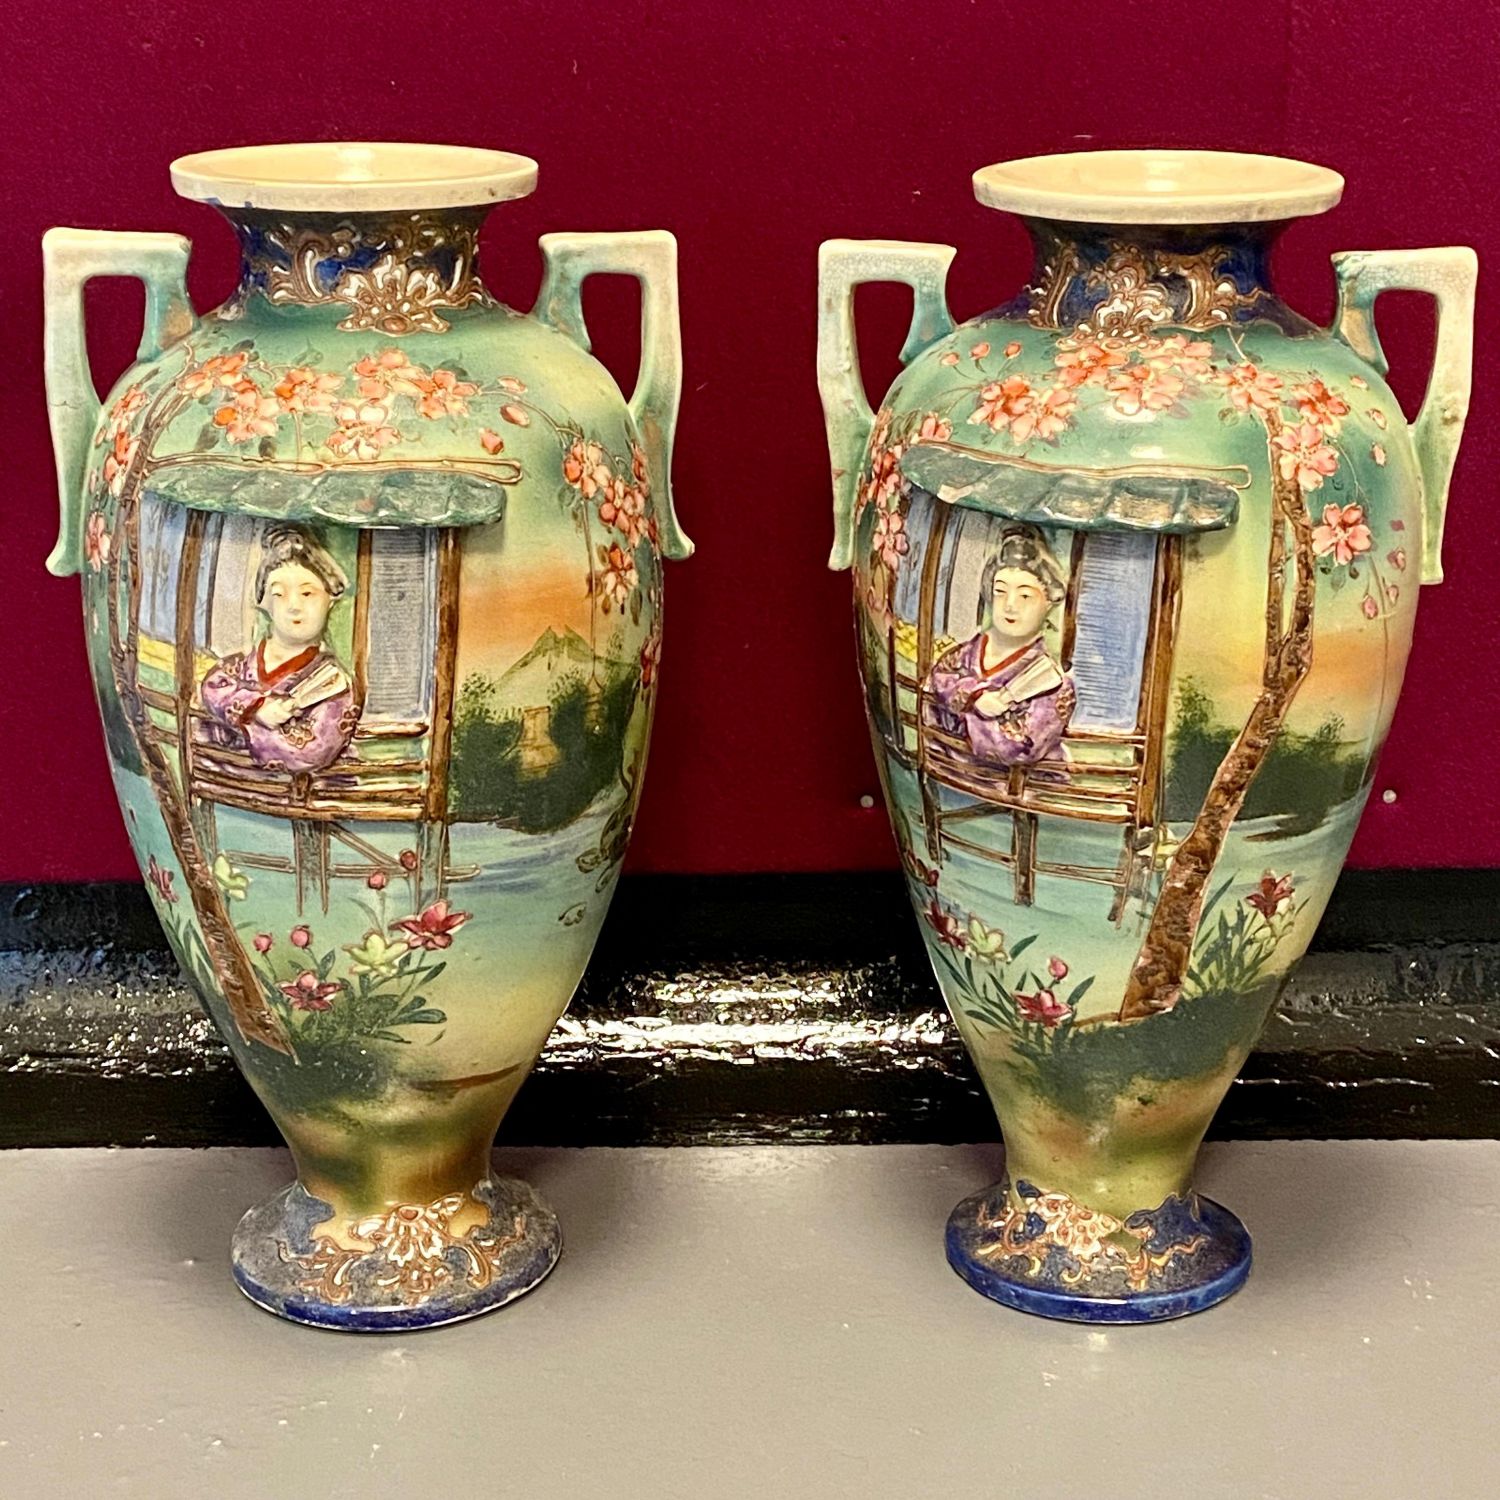 Details about   Vintage Oriental Vases New in Box 